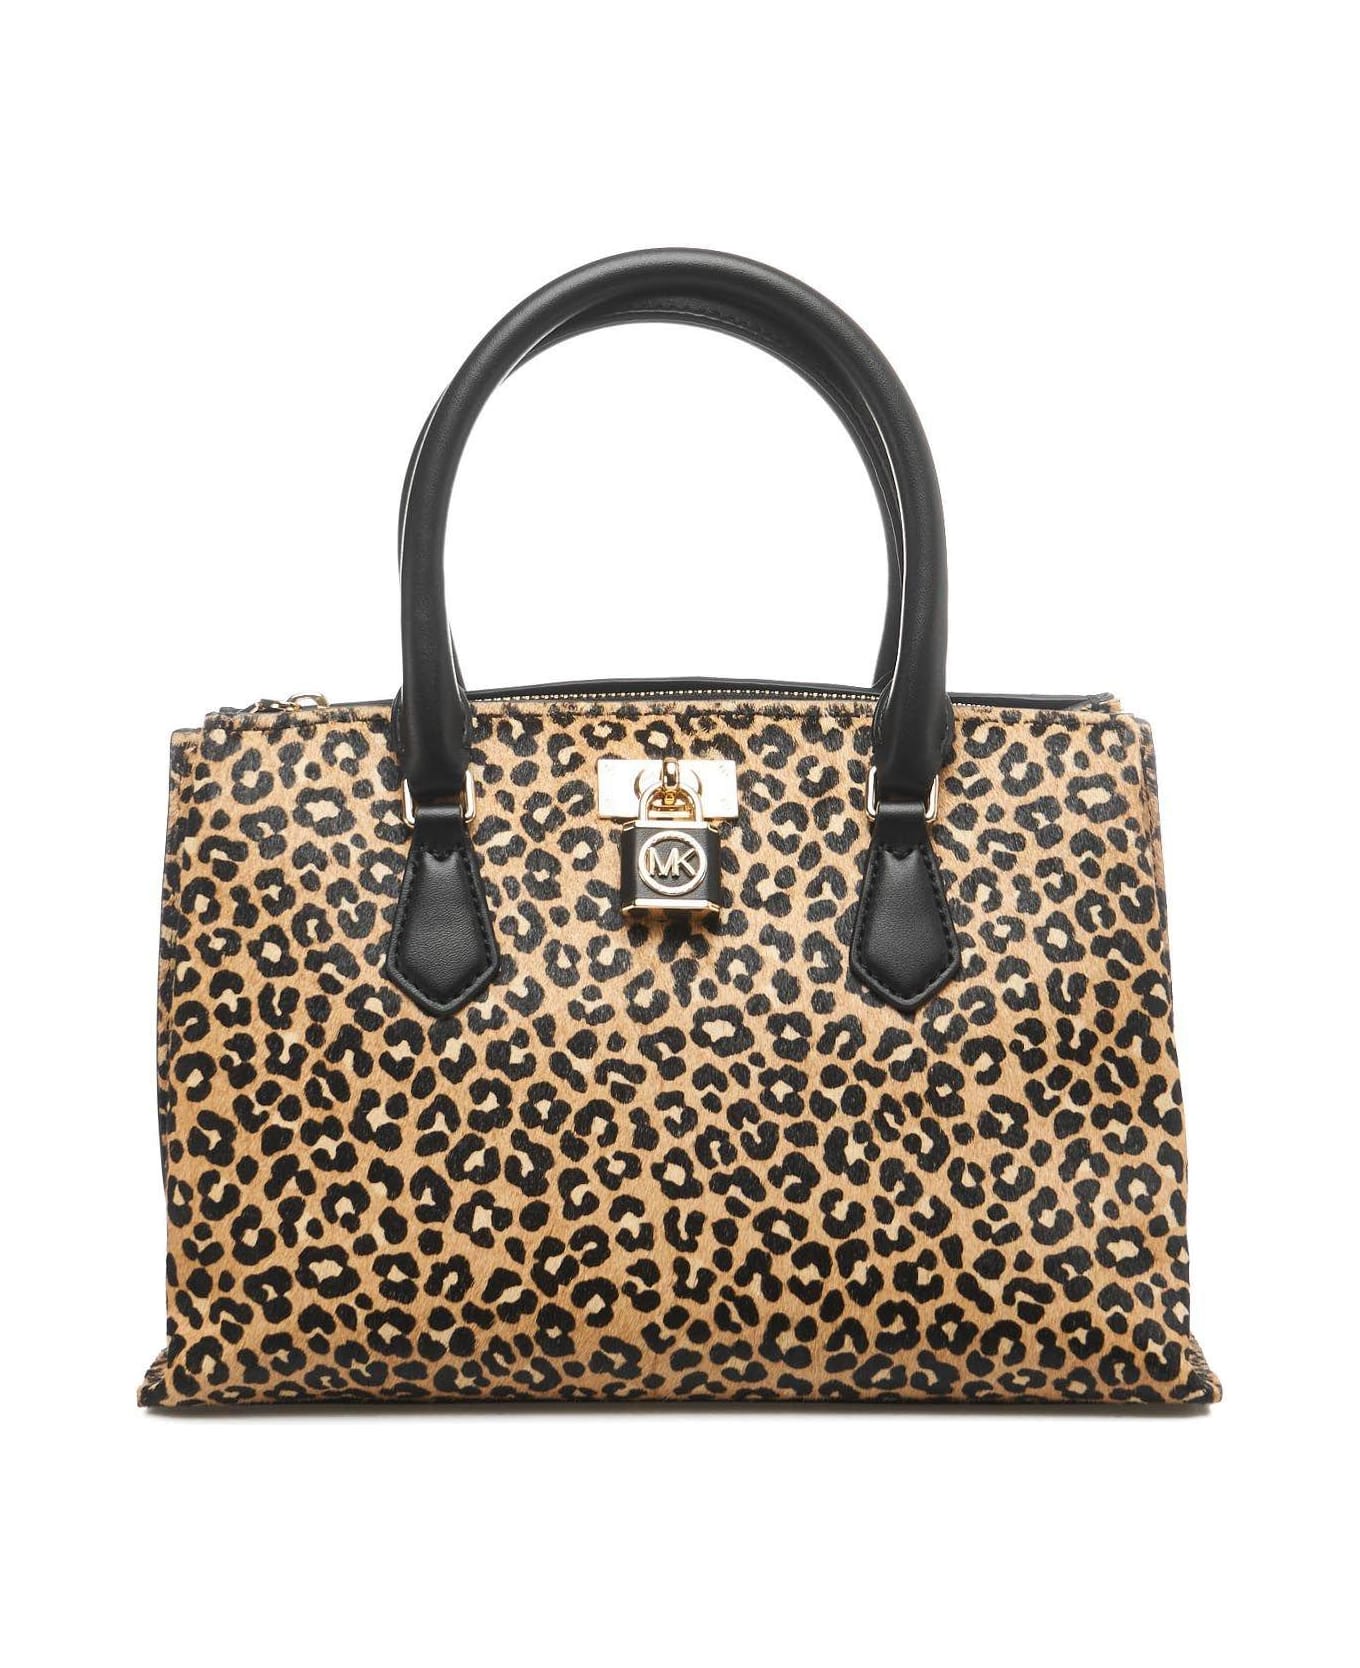 Michael Kors Collection Ruby Leopard Printed Small Tote Bag - Black Multi